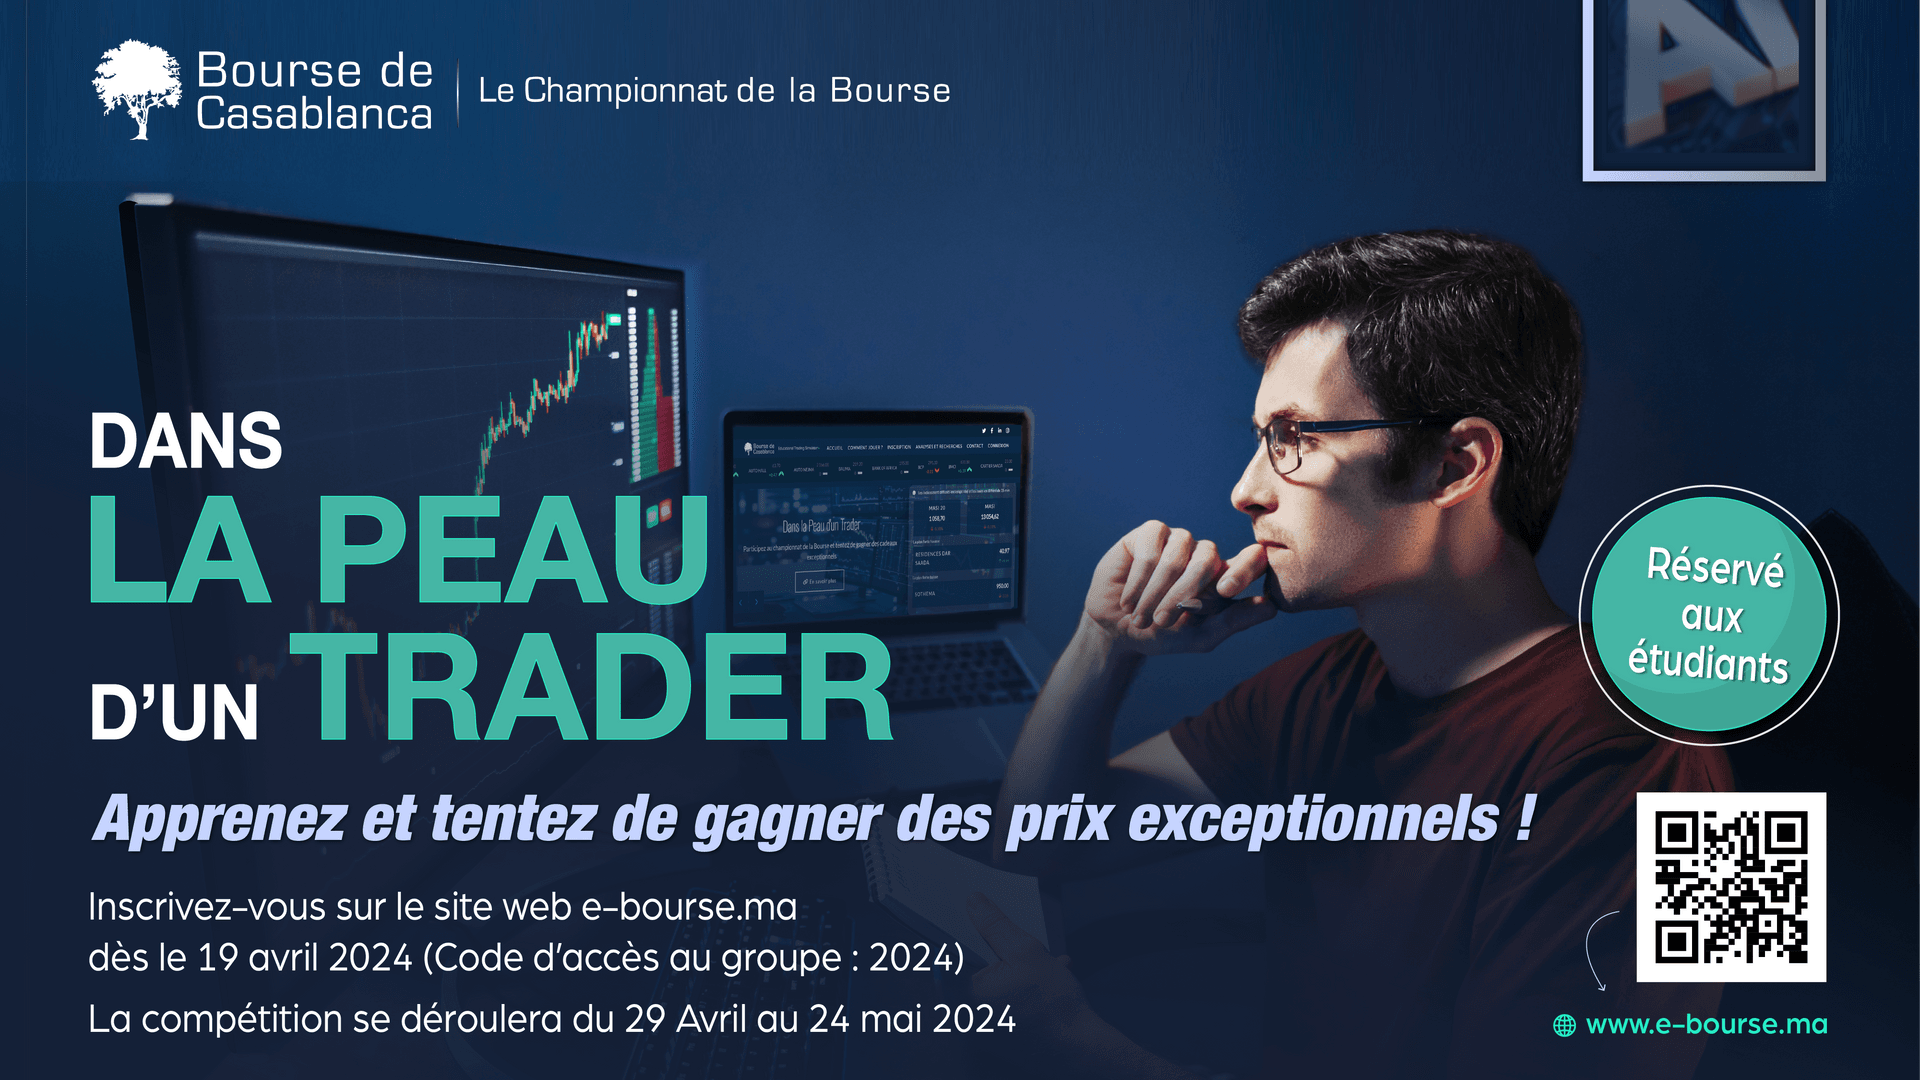 Bourse de Casablanca Championship 2024: Registrations are open for a total immersion in a dynamic stock market!